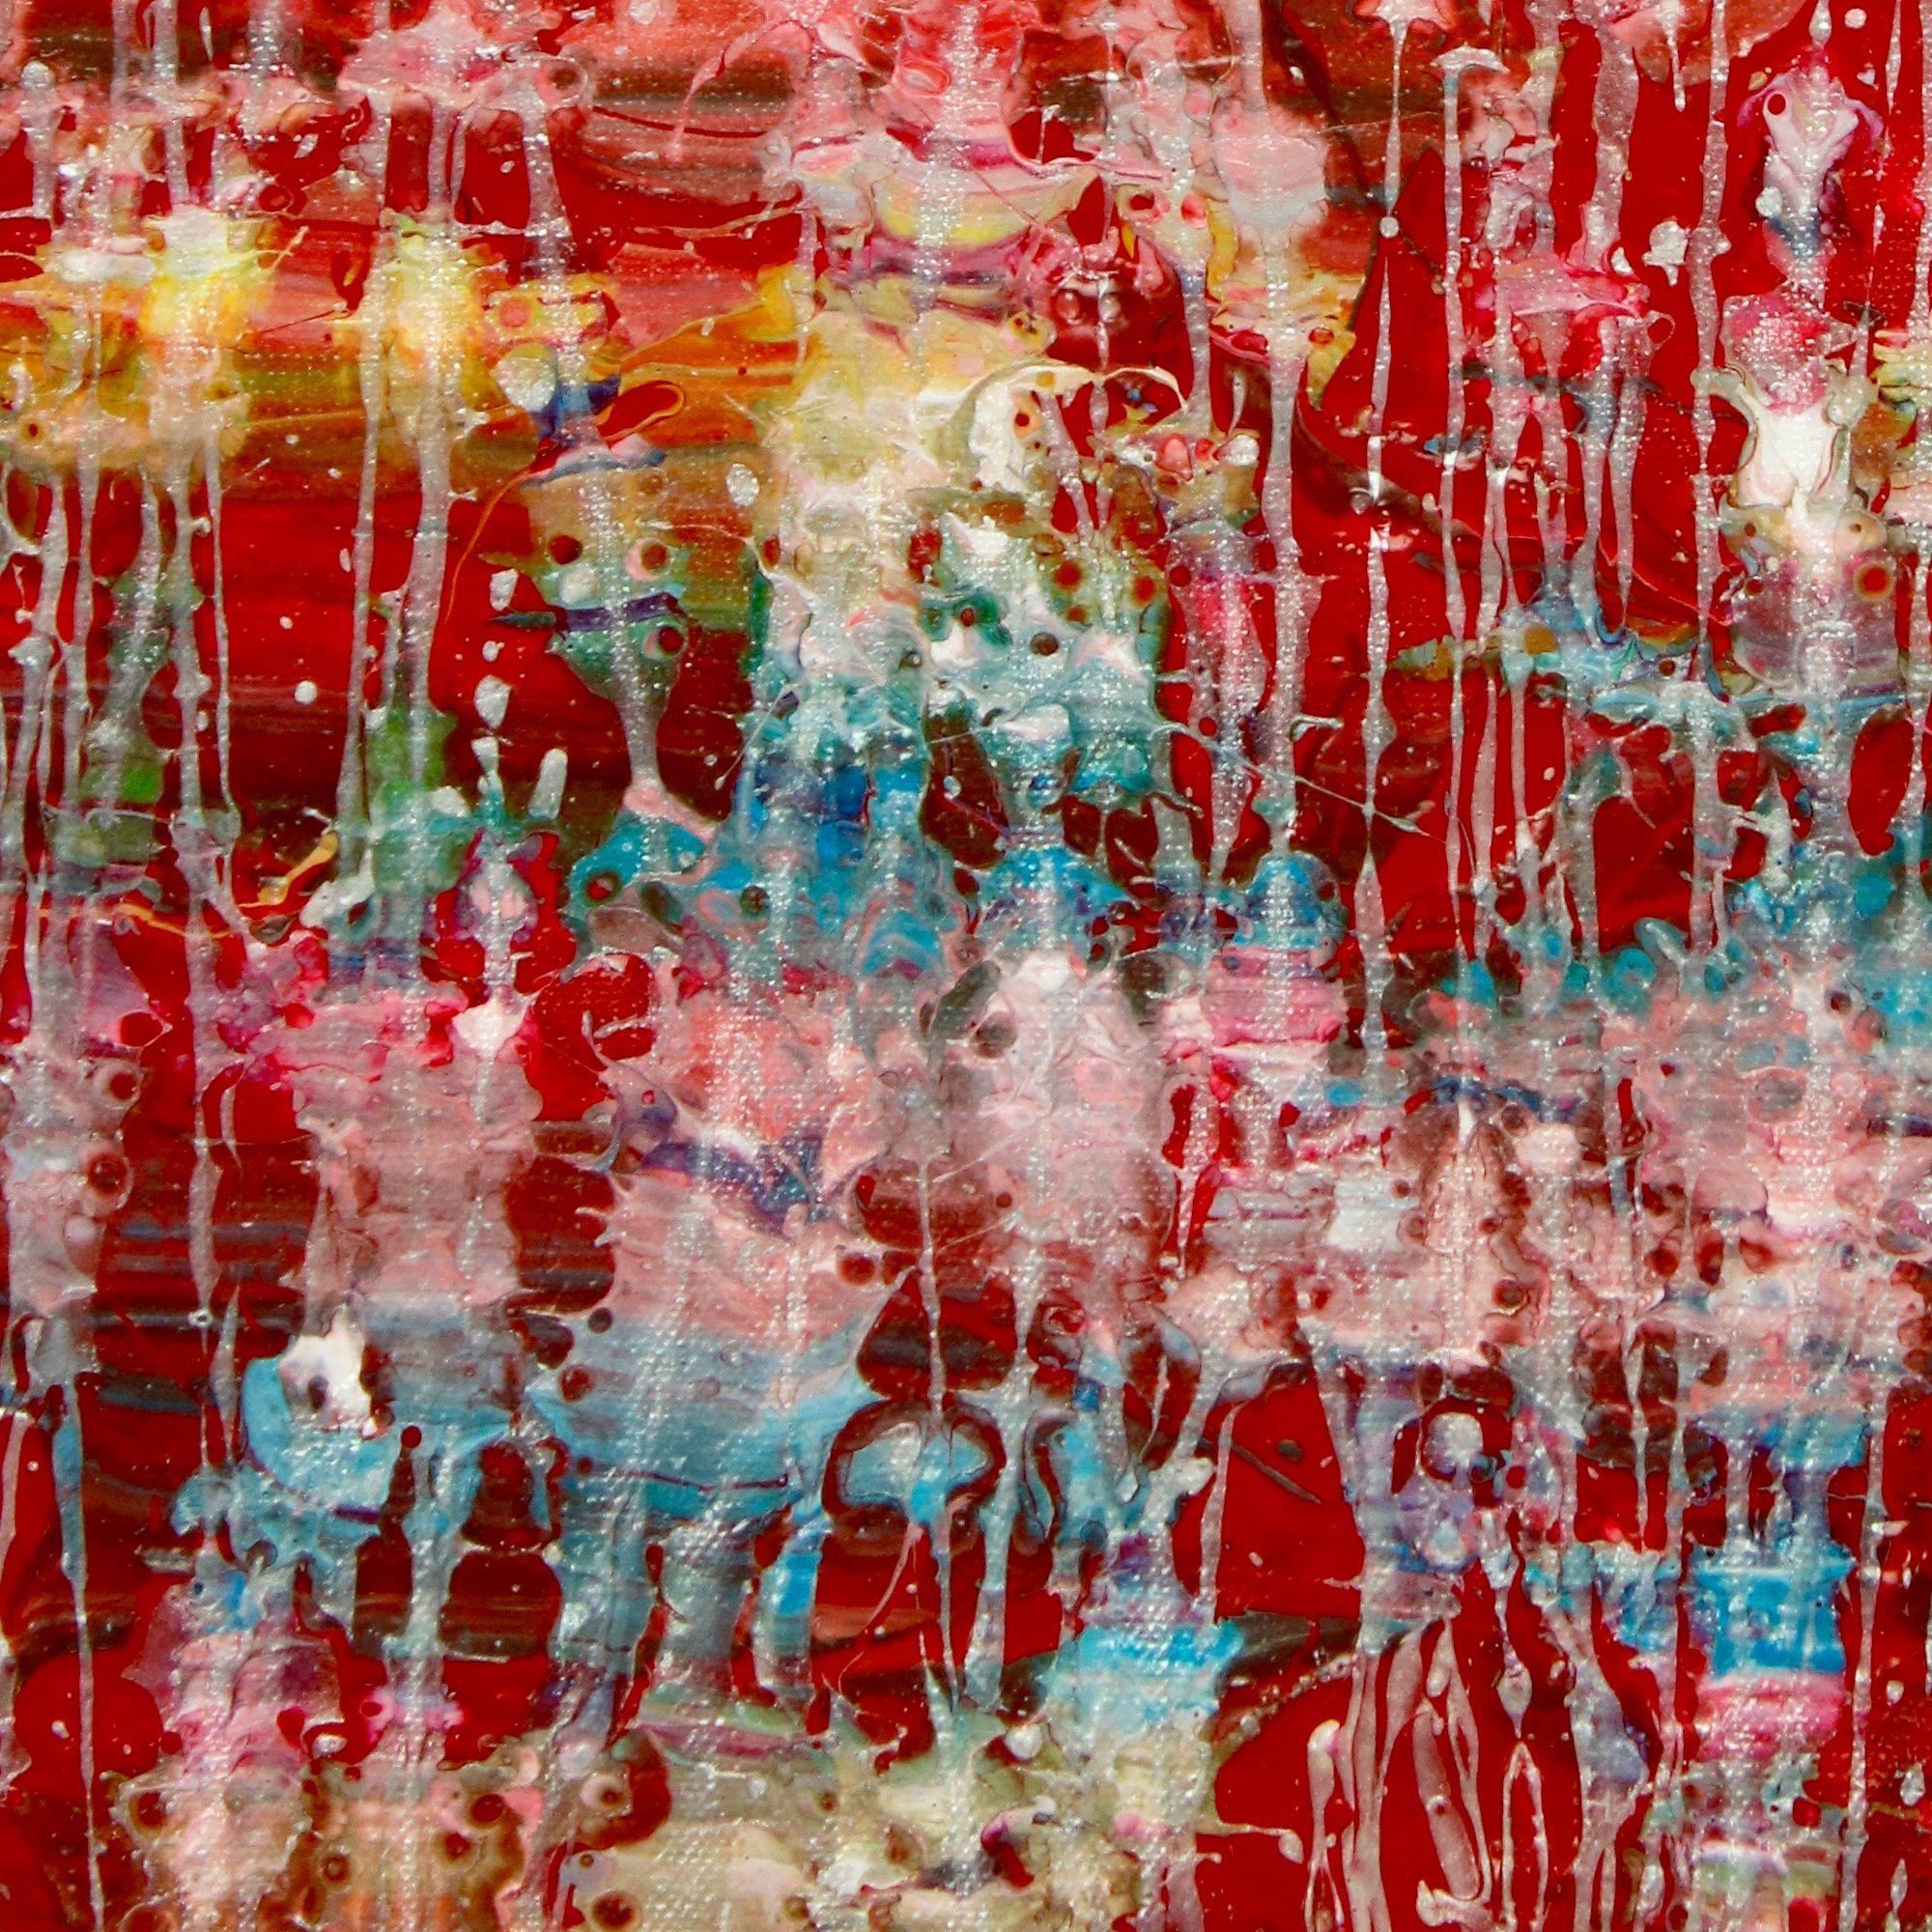 Bold and contemplative fiery abstract dark red background with silver paint drizzles. Layers of color blending with forceful paint strokes to reveal the underneath colors. This painting arrives in a tube, signed and enough edge for an inch deep